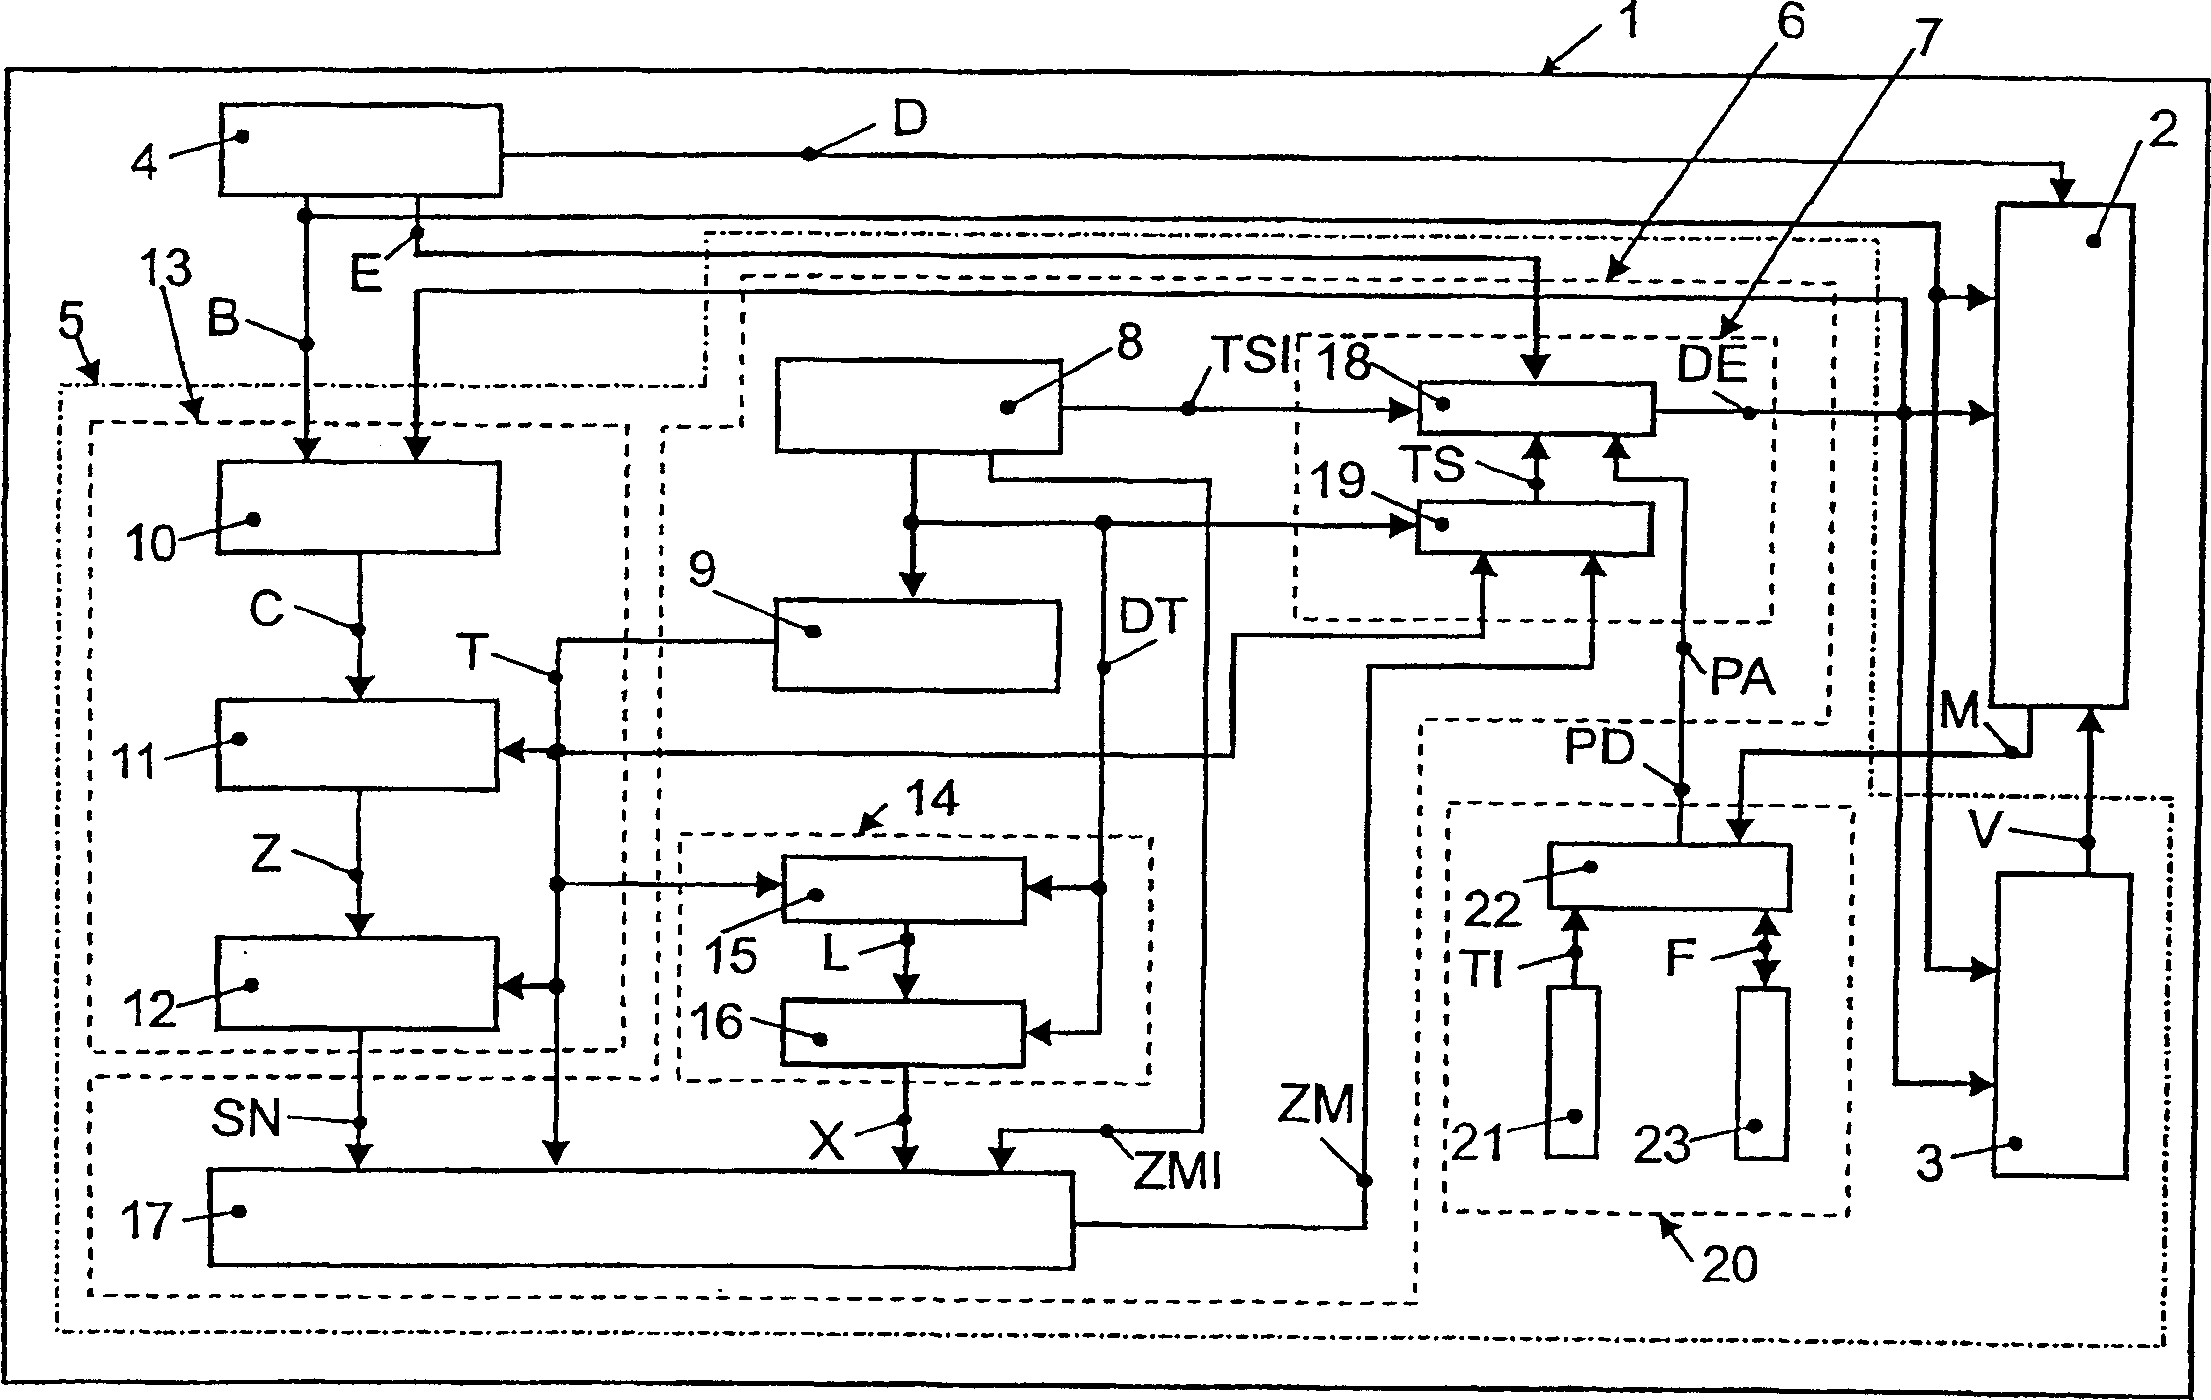 Device with modular unit able to be started and stop